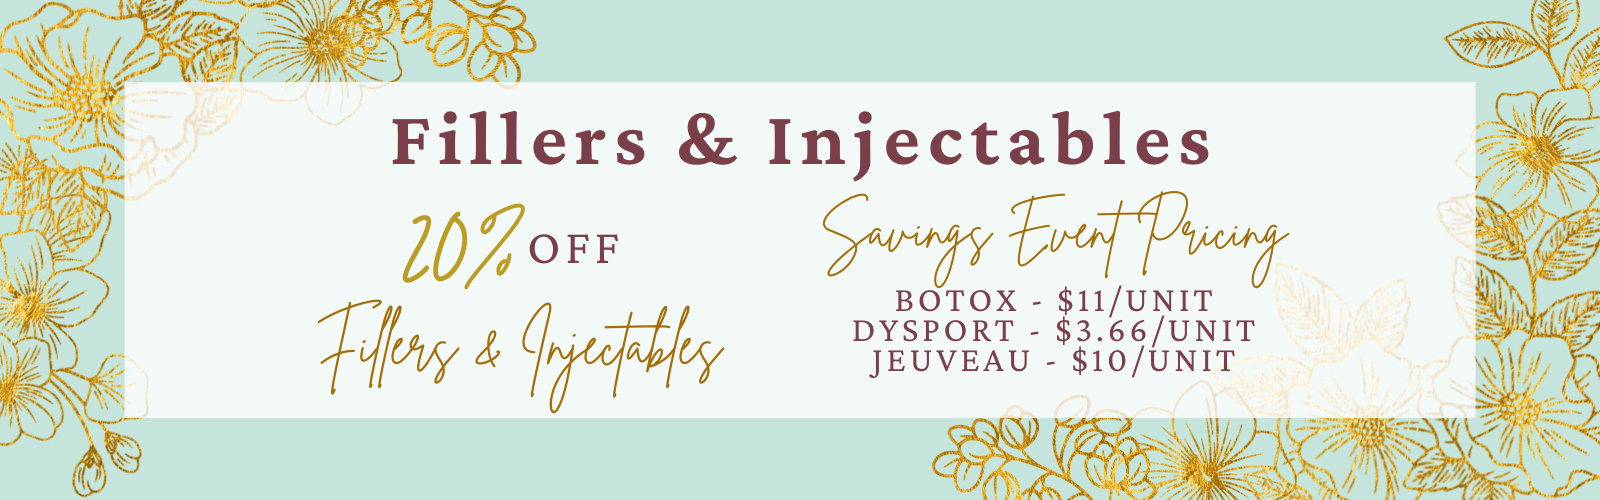 Save on Fillers & Injectables